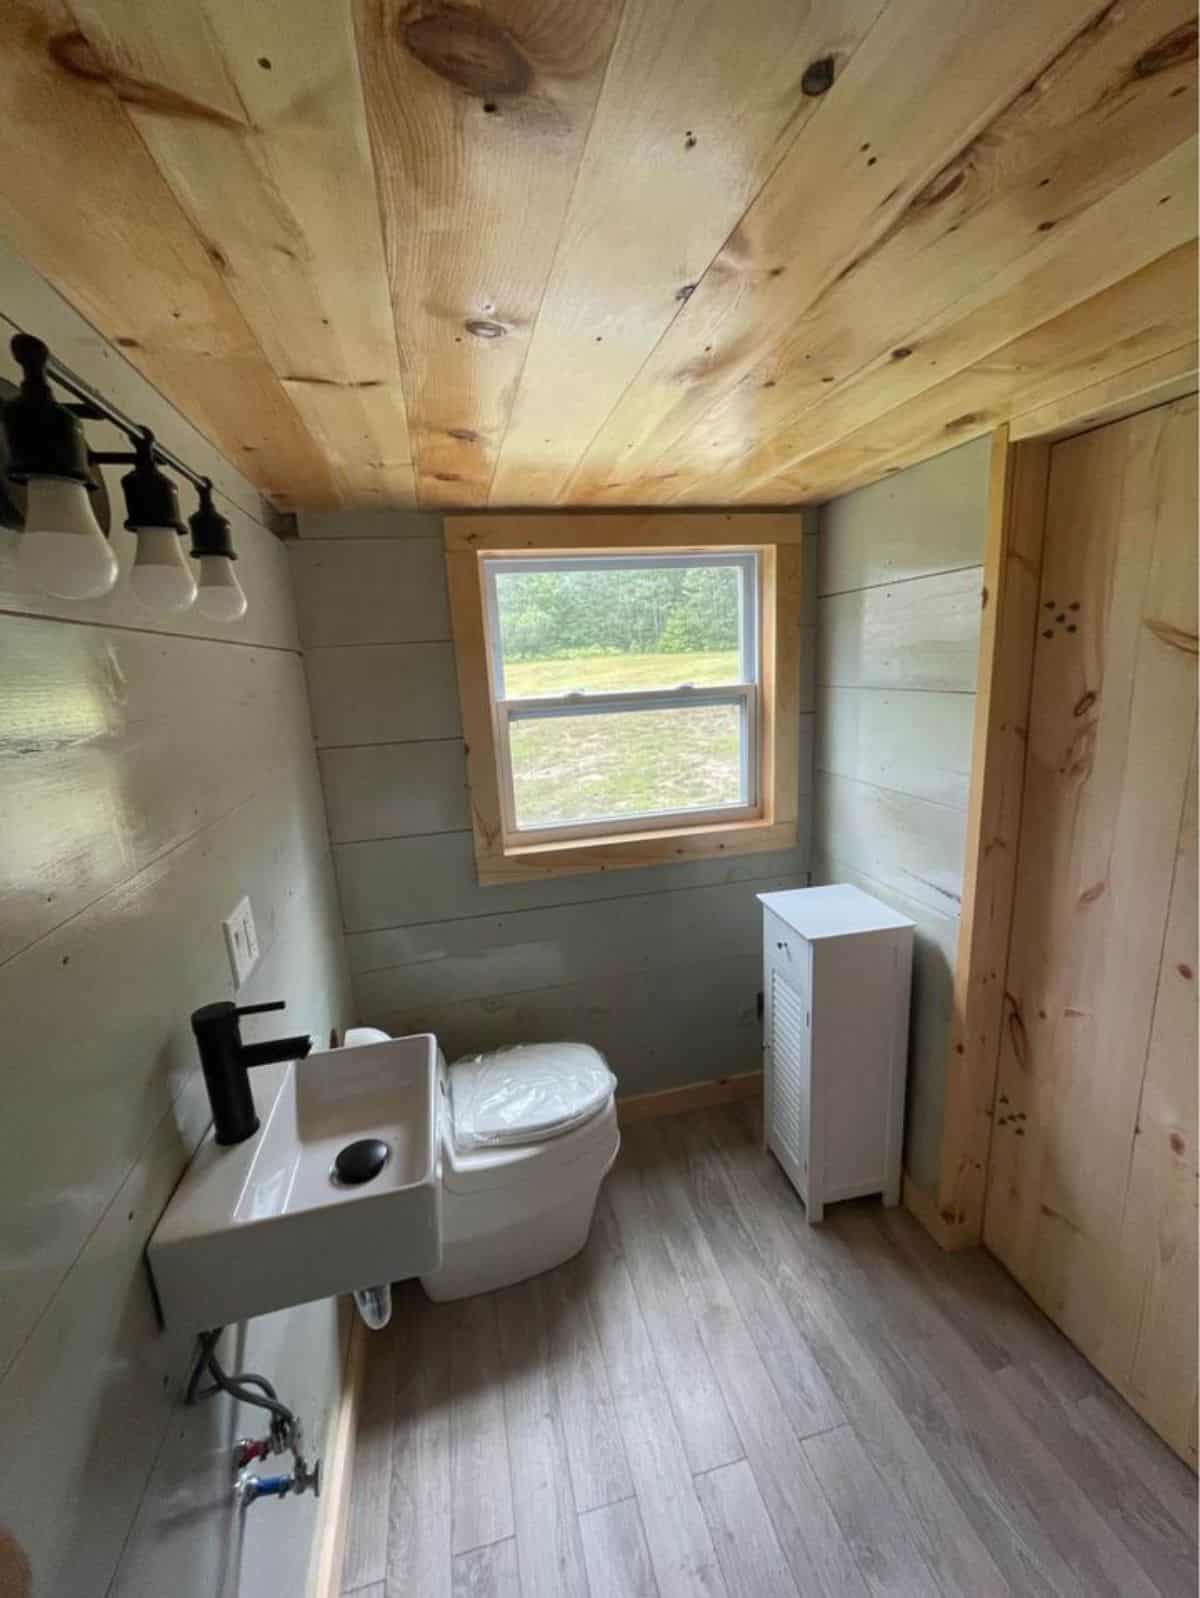 bathroom of tiny guest home has all the standard fittings